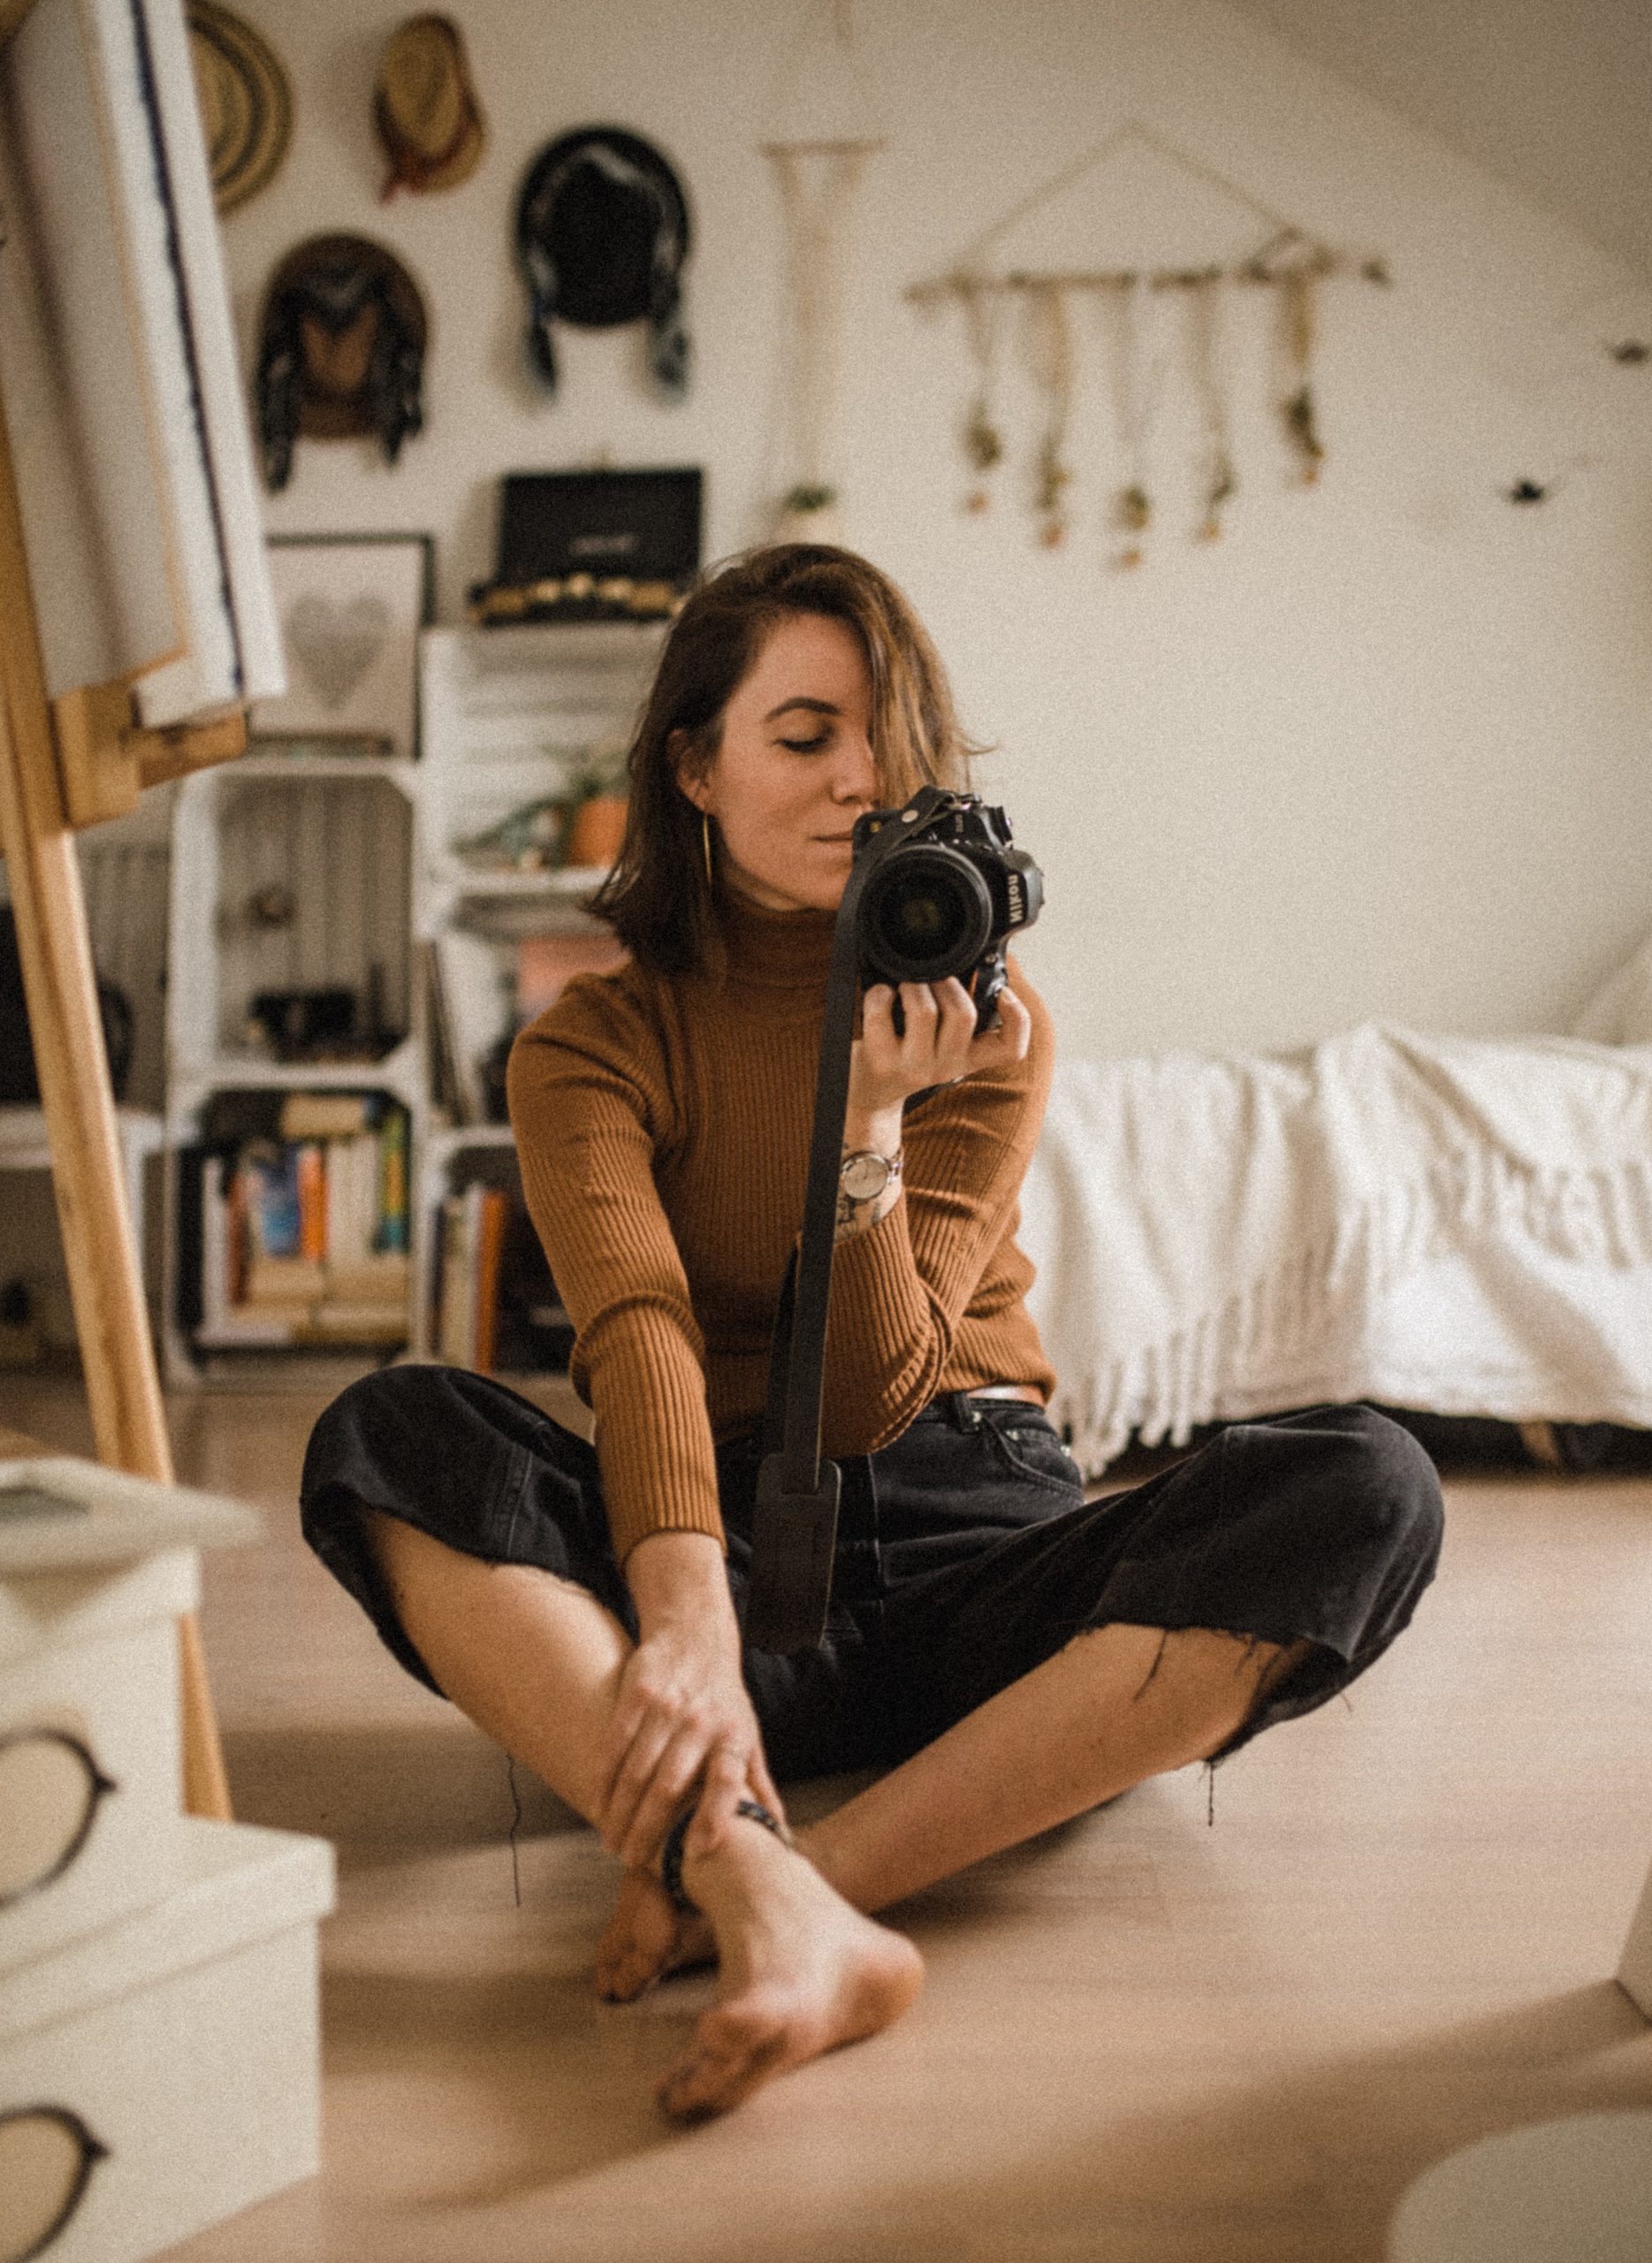 kinga cichewicz HHw9lc0ogIs unsplash scaled - Making An Instagram Worthy Corner In Your Room